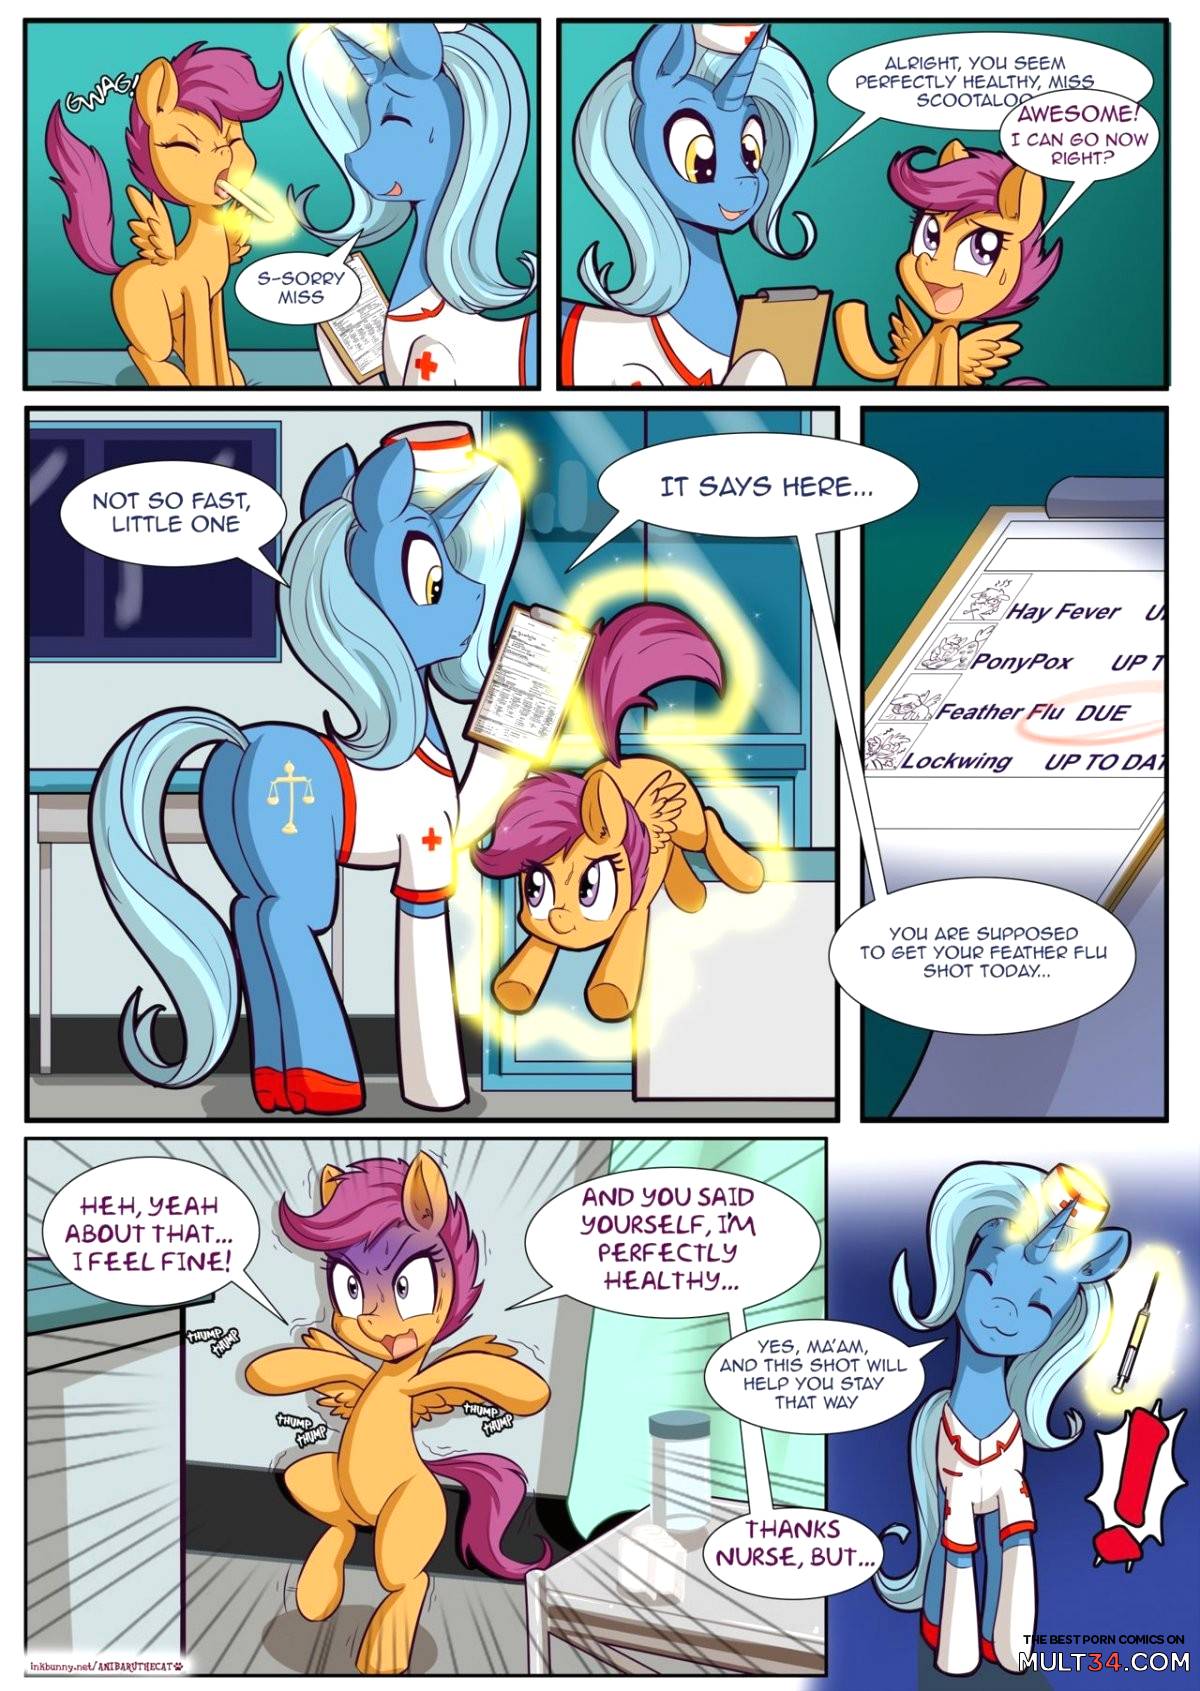 Cutie mark check up 2 page 3